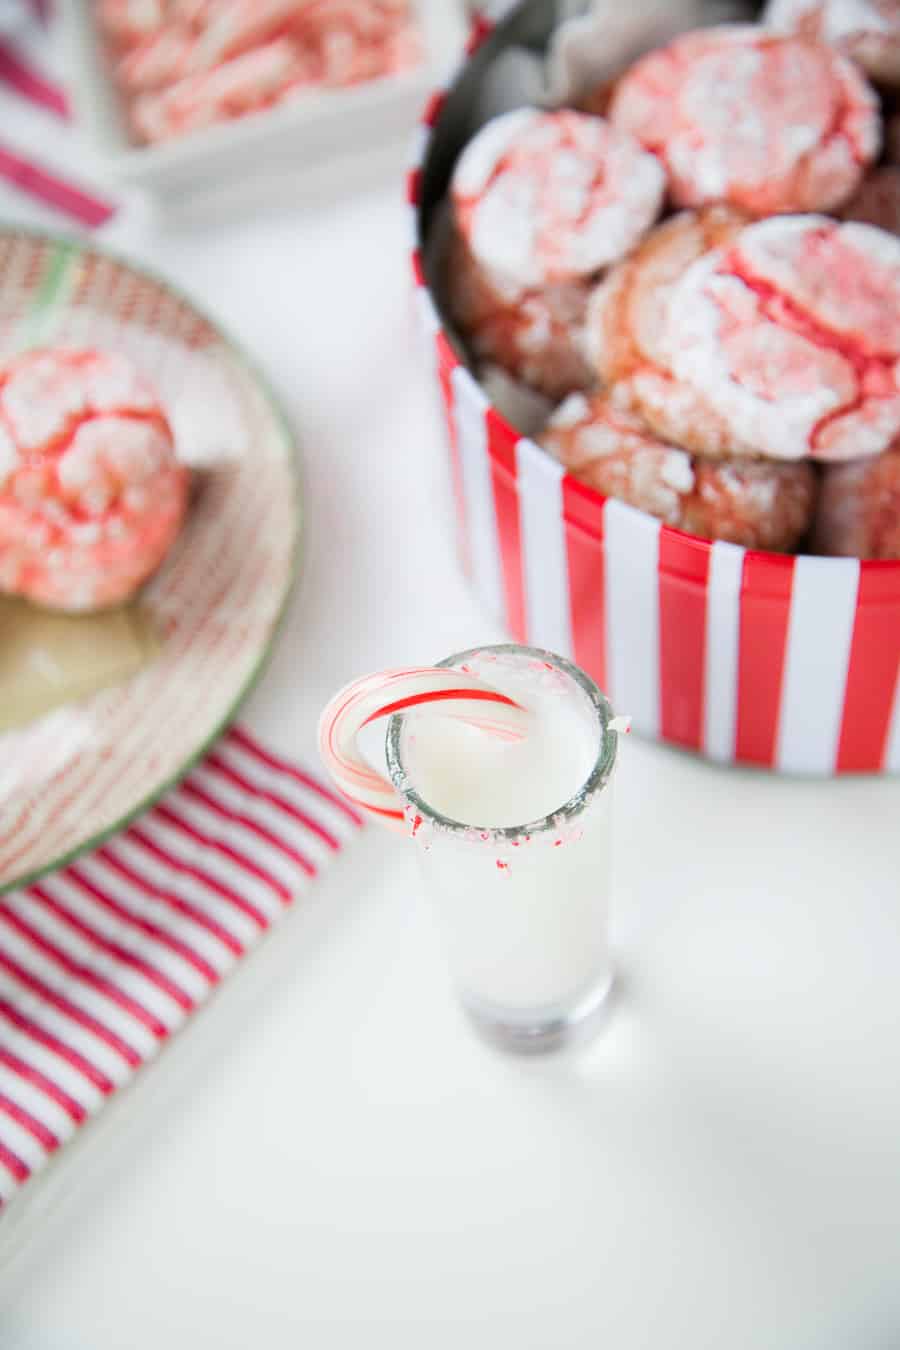 A glass of peppermint schnapps in front of a tin filled with crinkle cookies